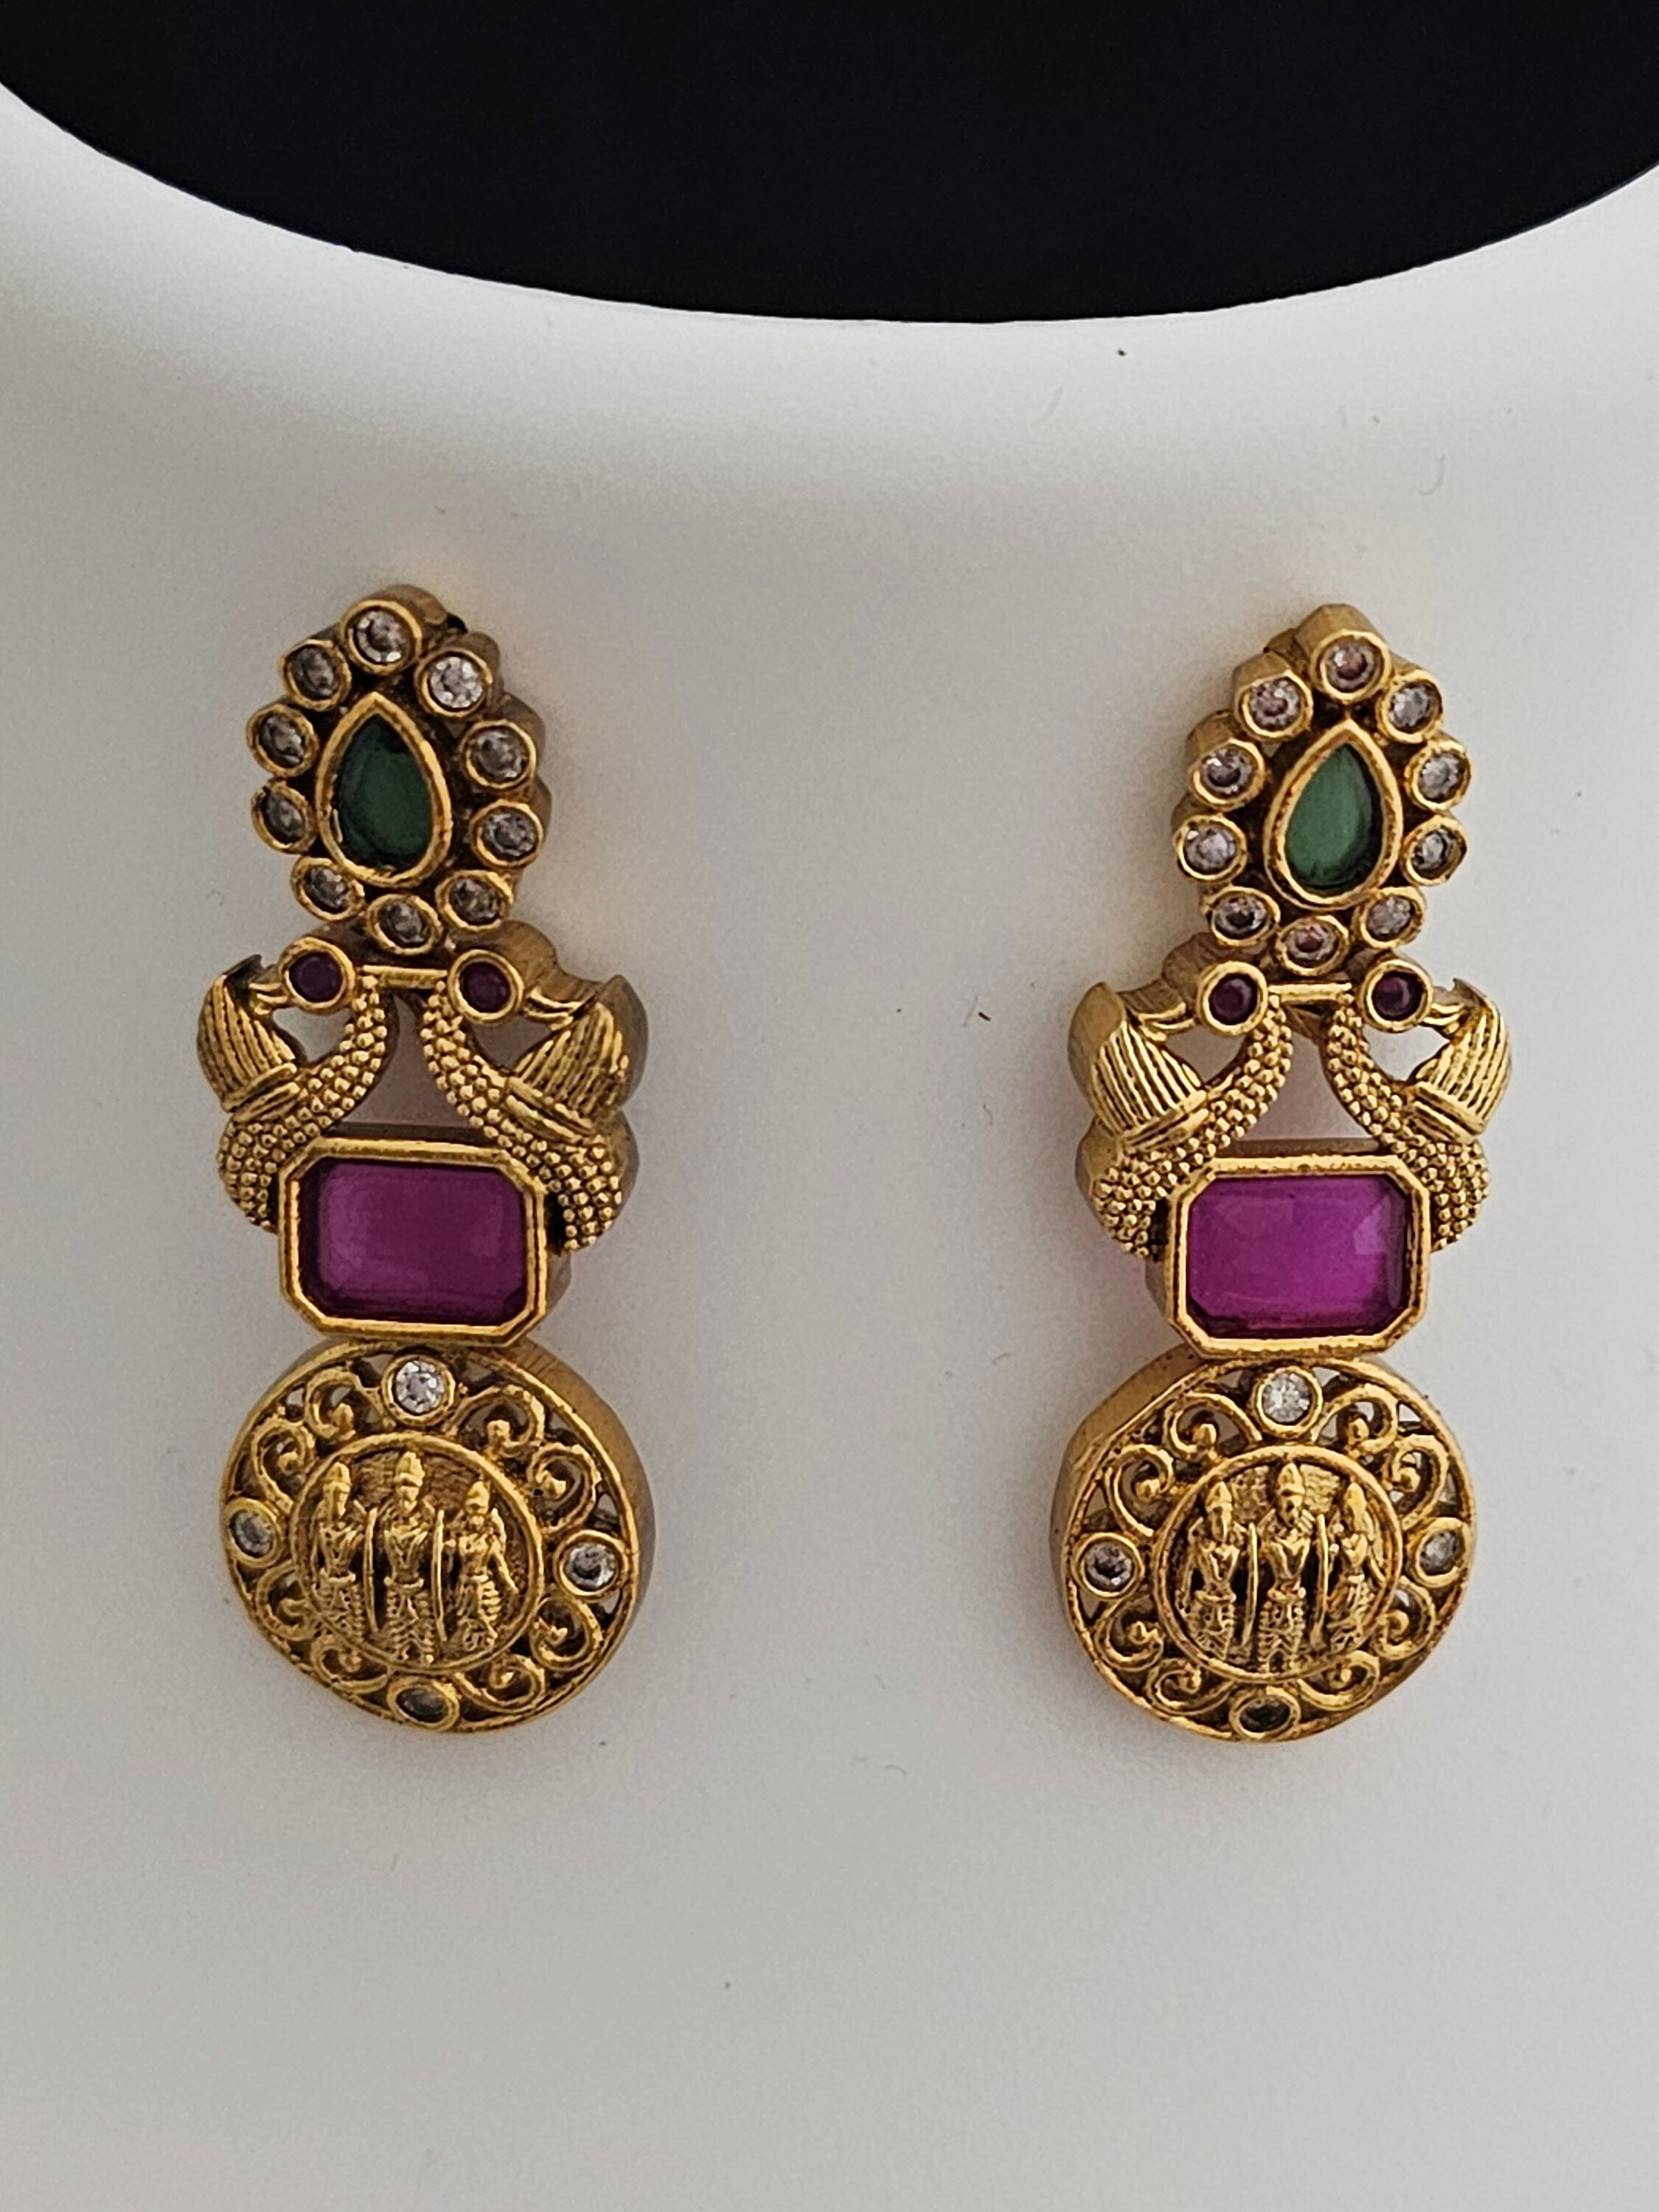 Premium Quality Ramparivar Peacock AD stone Haram with matching Earrings - Gold Jewelry Replica